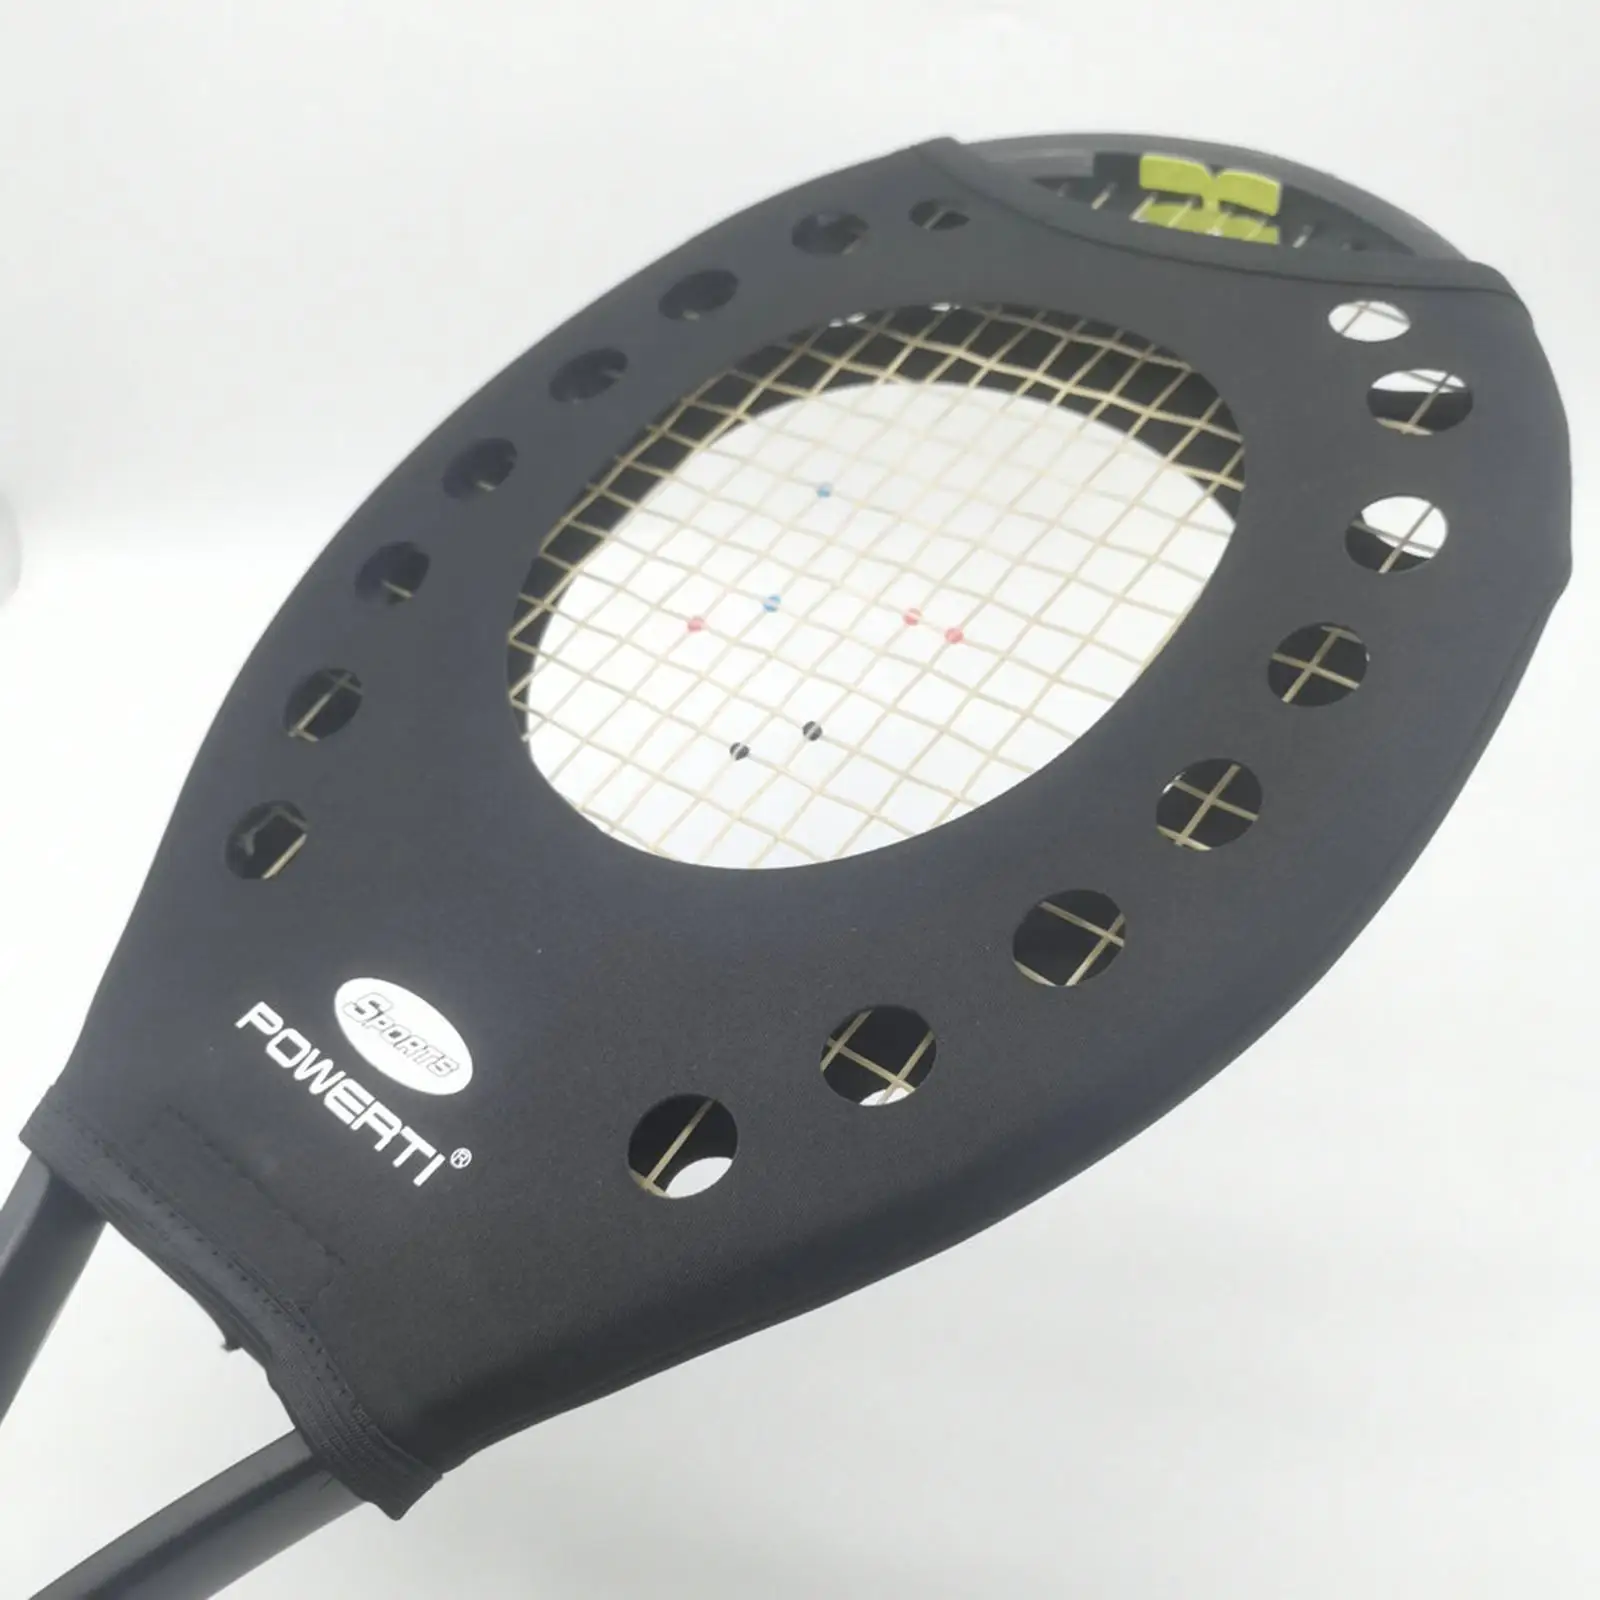 Tennis Racket Sweet Spot Trainer Learn to Hit The Center Protection Cover for Practice